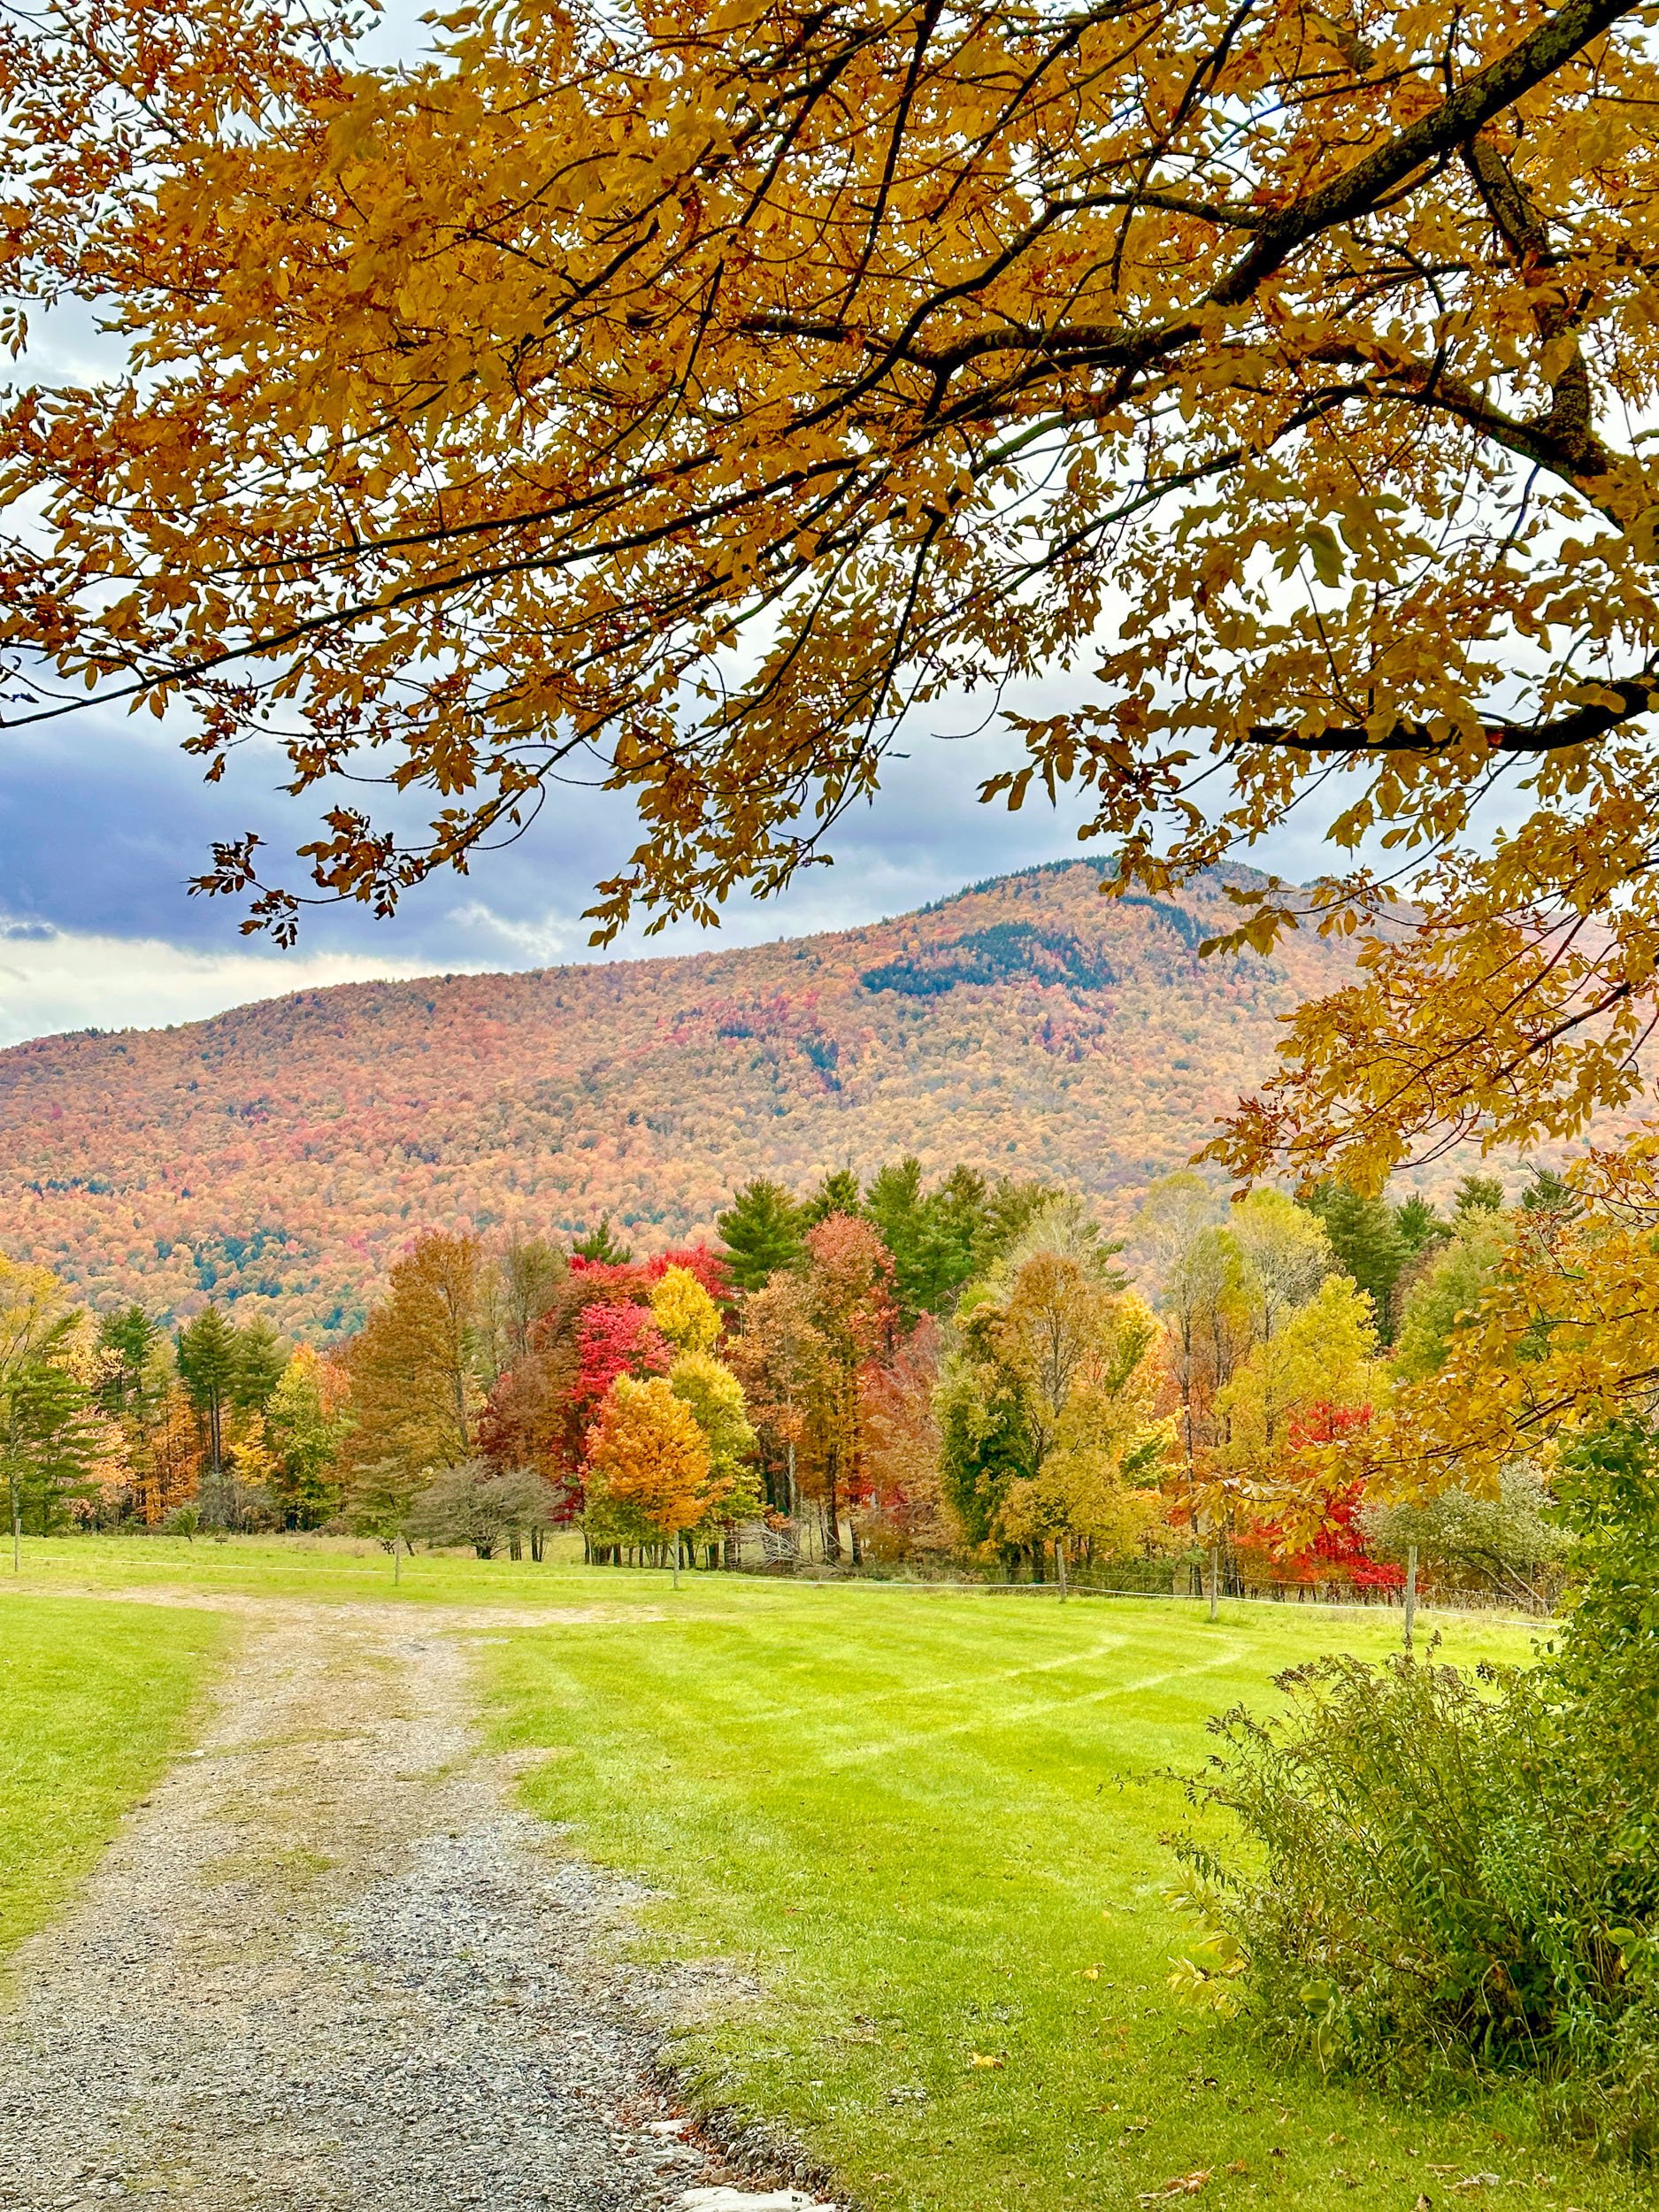 Scenic fall foliage and mountains along a gravel path in Vermont.